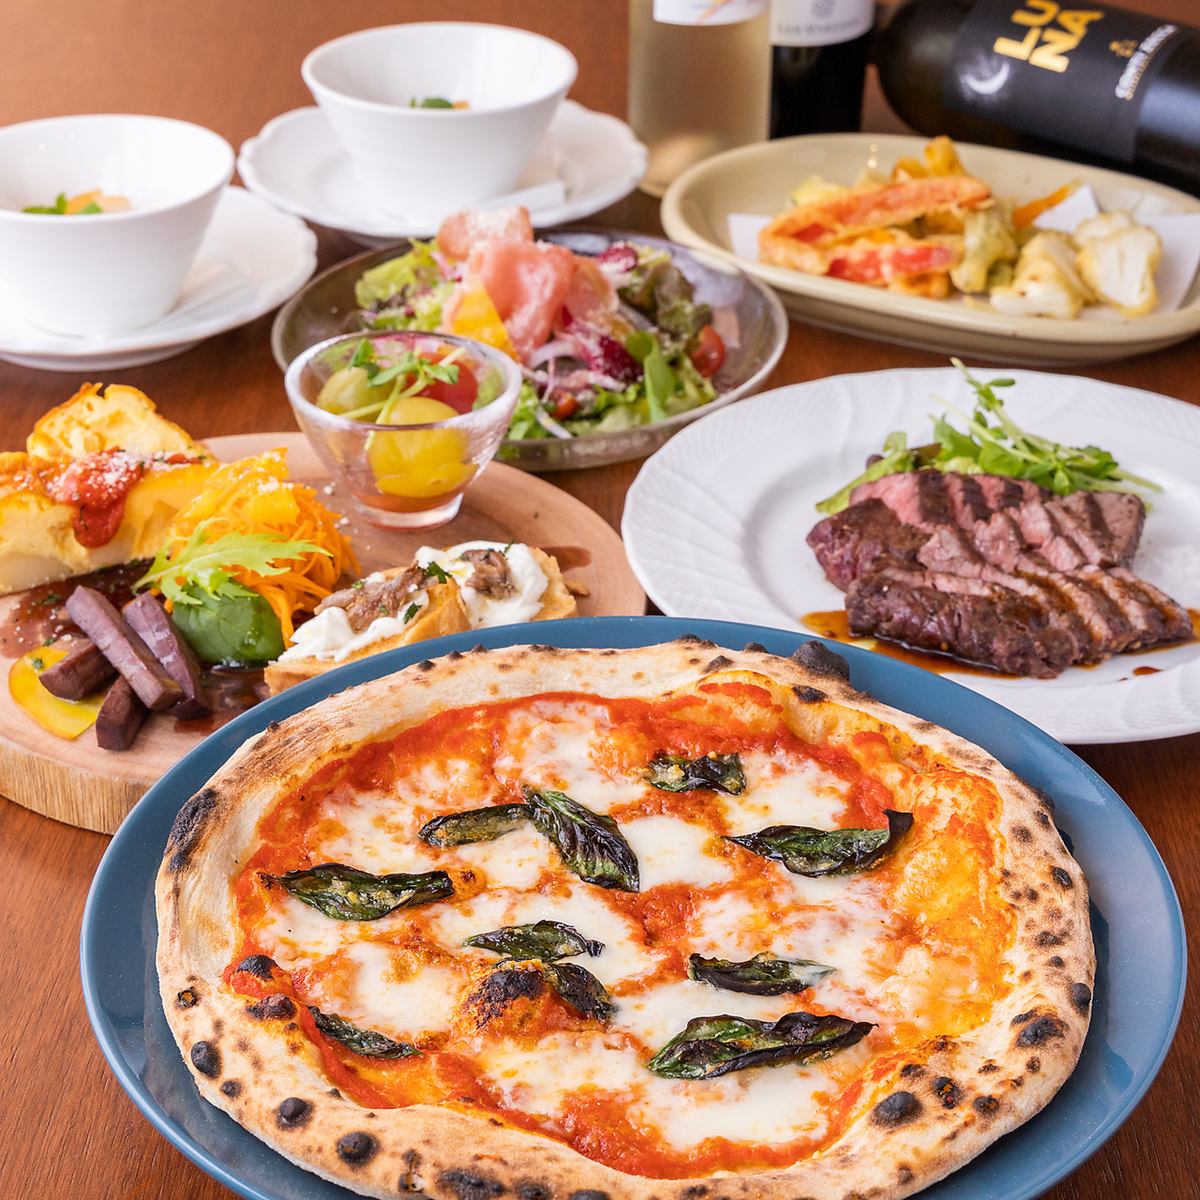 A variety of menus using seasonal ingredients, including authentic pizza, go great with alcohol ☆